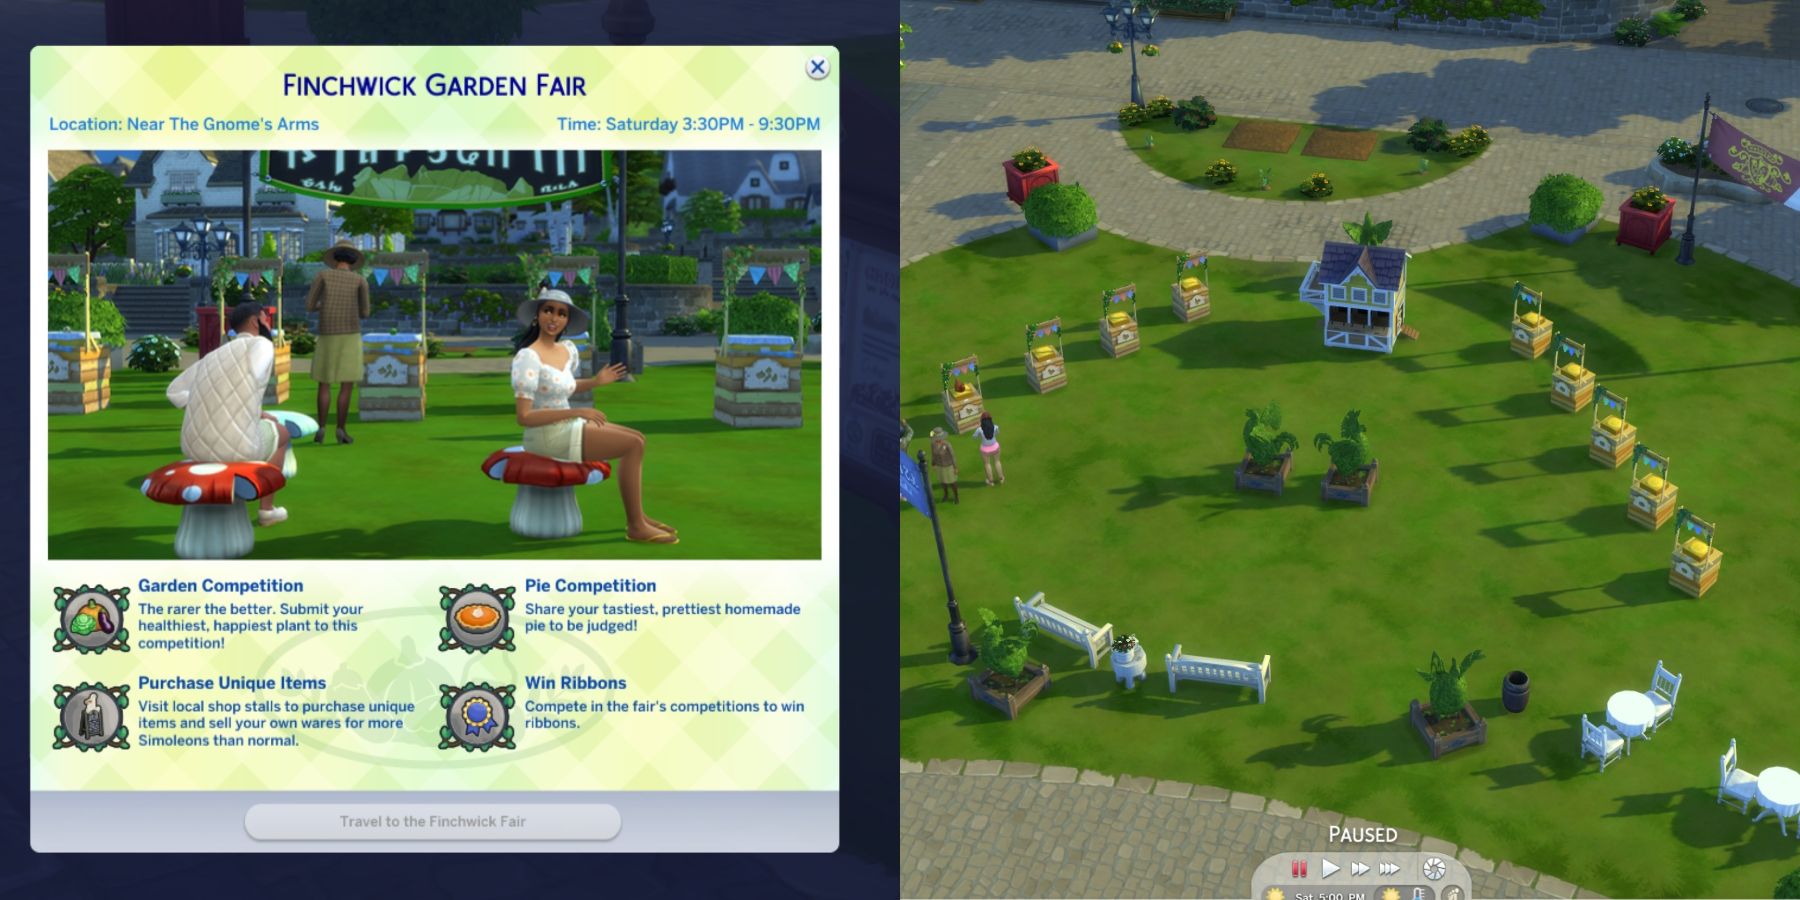 Finchwick fair details and location in the sims 4